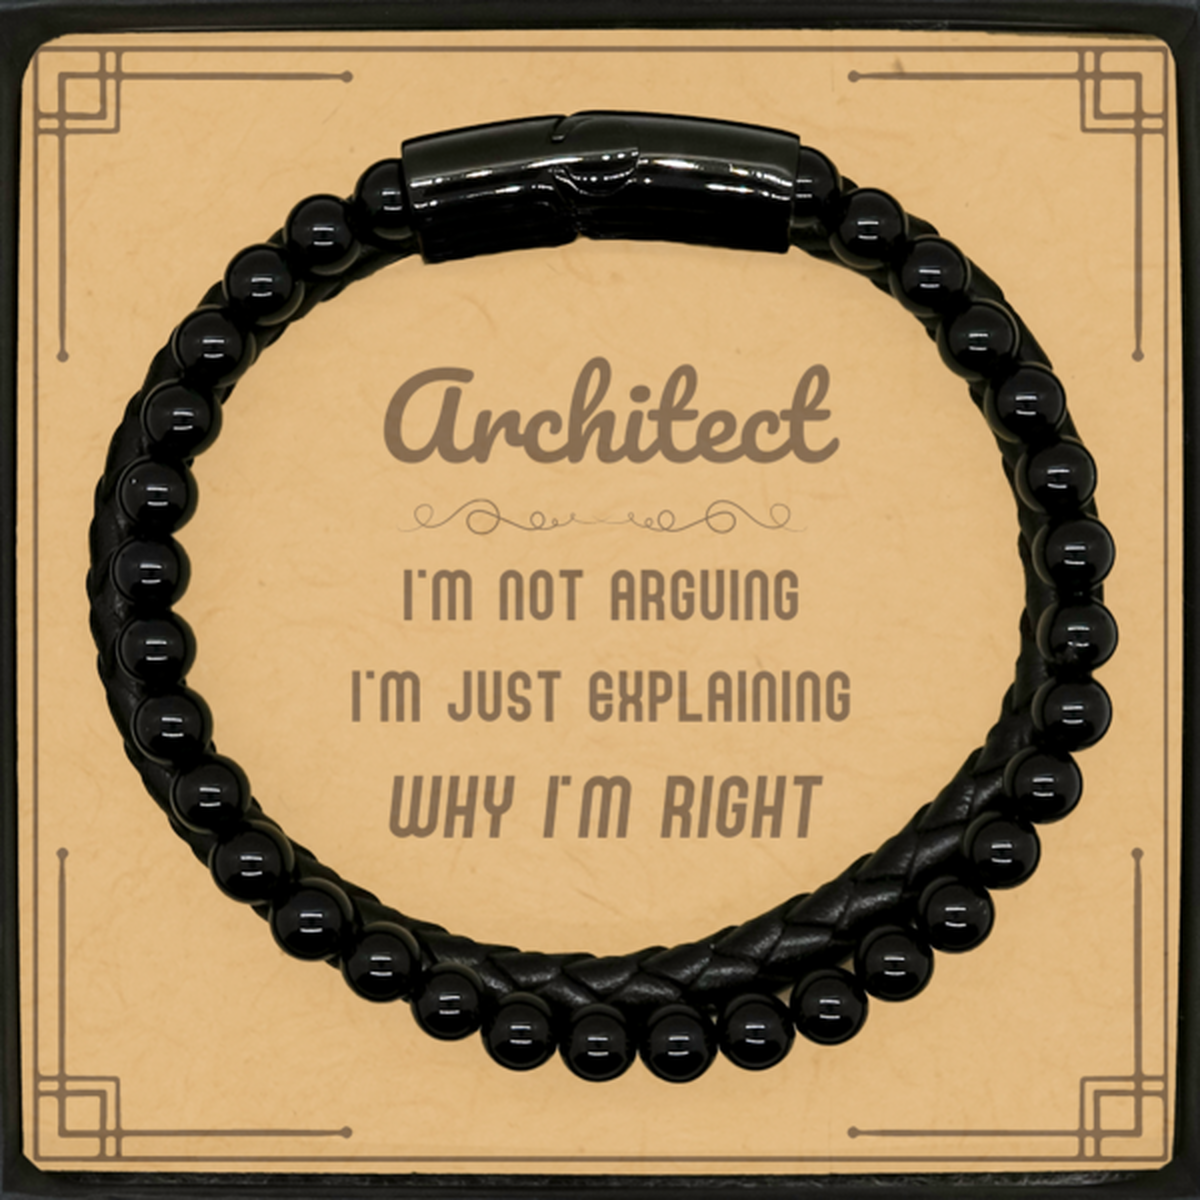 Architect I'm not Arguing. I'm Just Explaining Why I'm RIGHT Stone Leather Bracelets, Funny Saying Quote Architect Gifts For Architect Message Card Graduation Birthday Christmas Gifts for Men Women Coworker